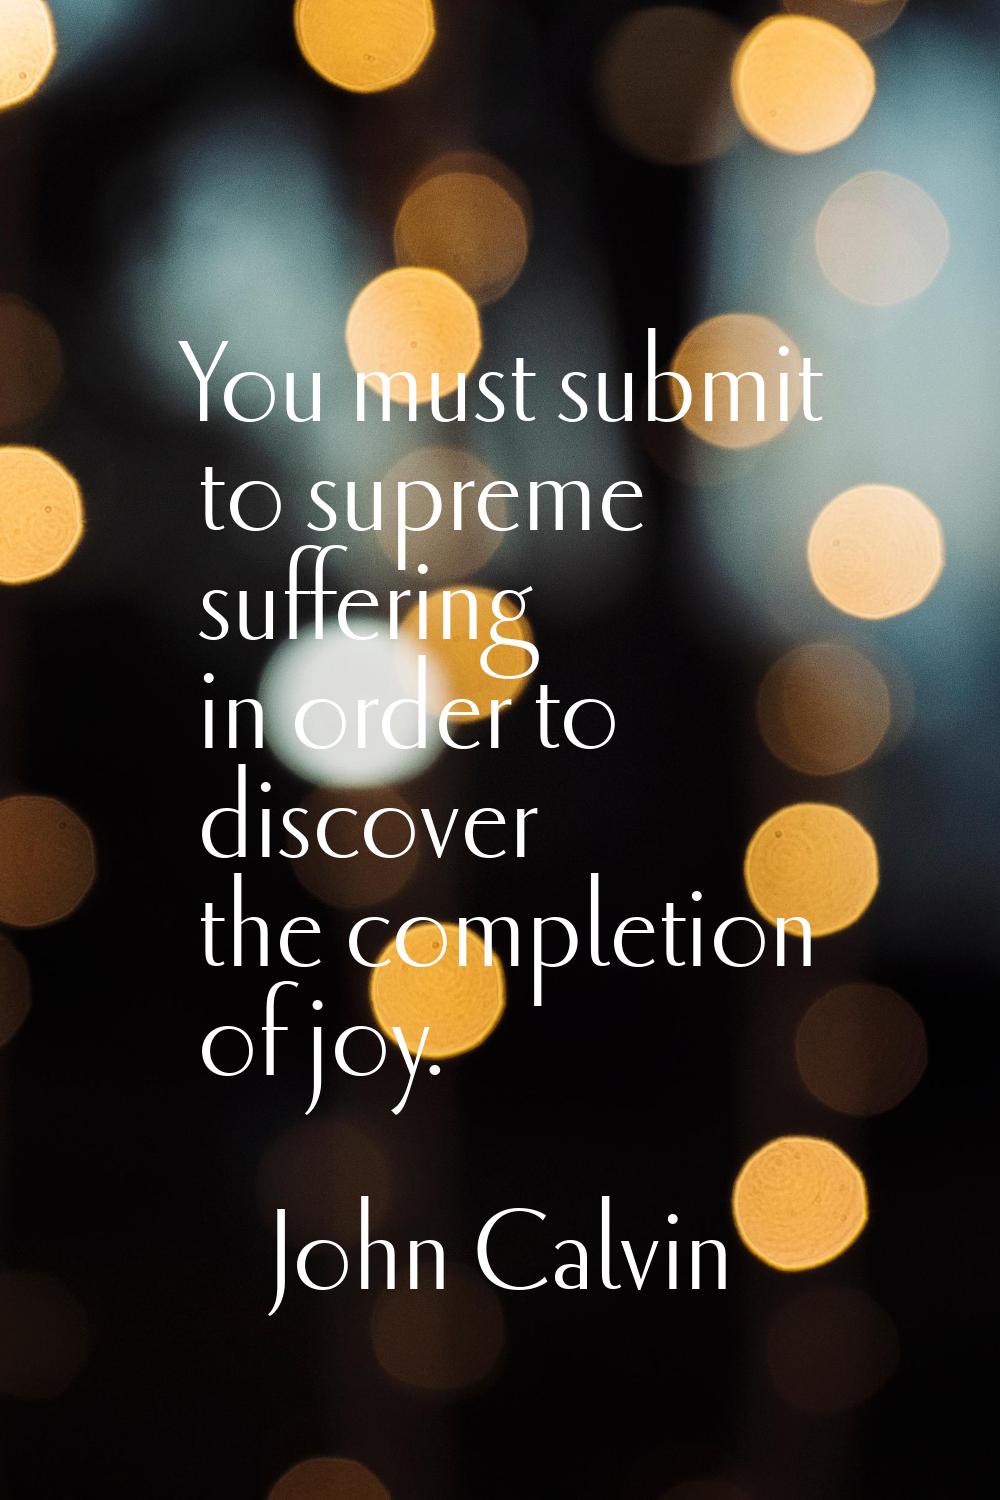 You must submit to supreme suffering in order to discover the completion of joy.